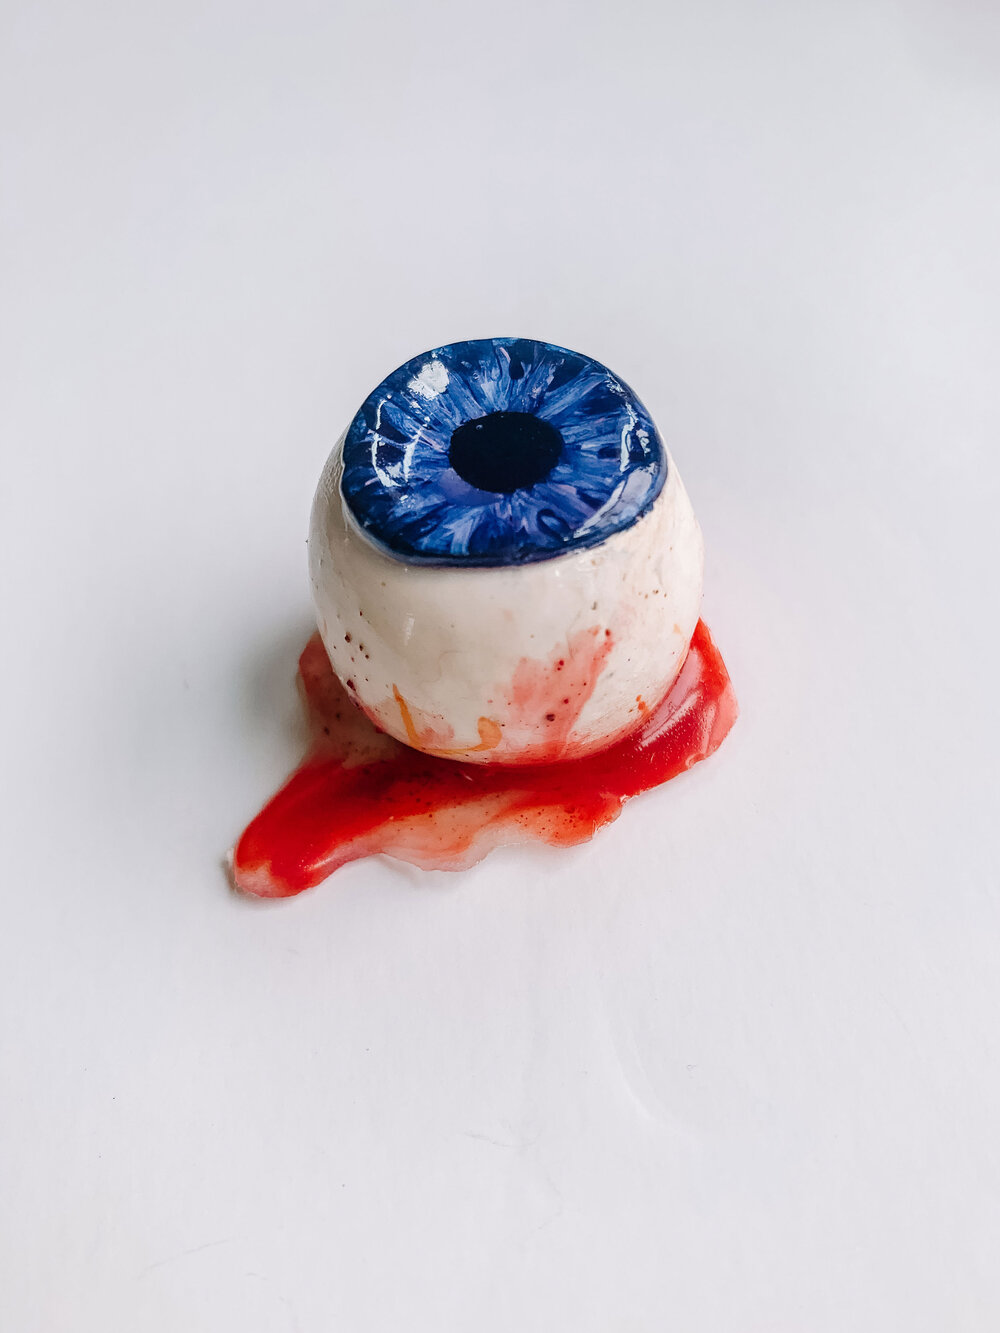  How to Make a Realistic Bloody Eyeball 